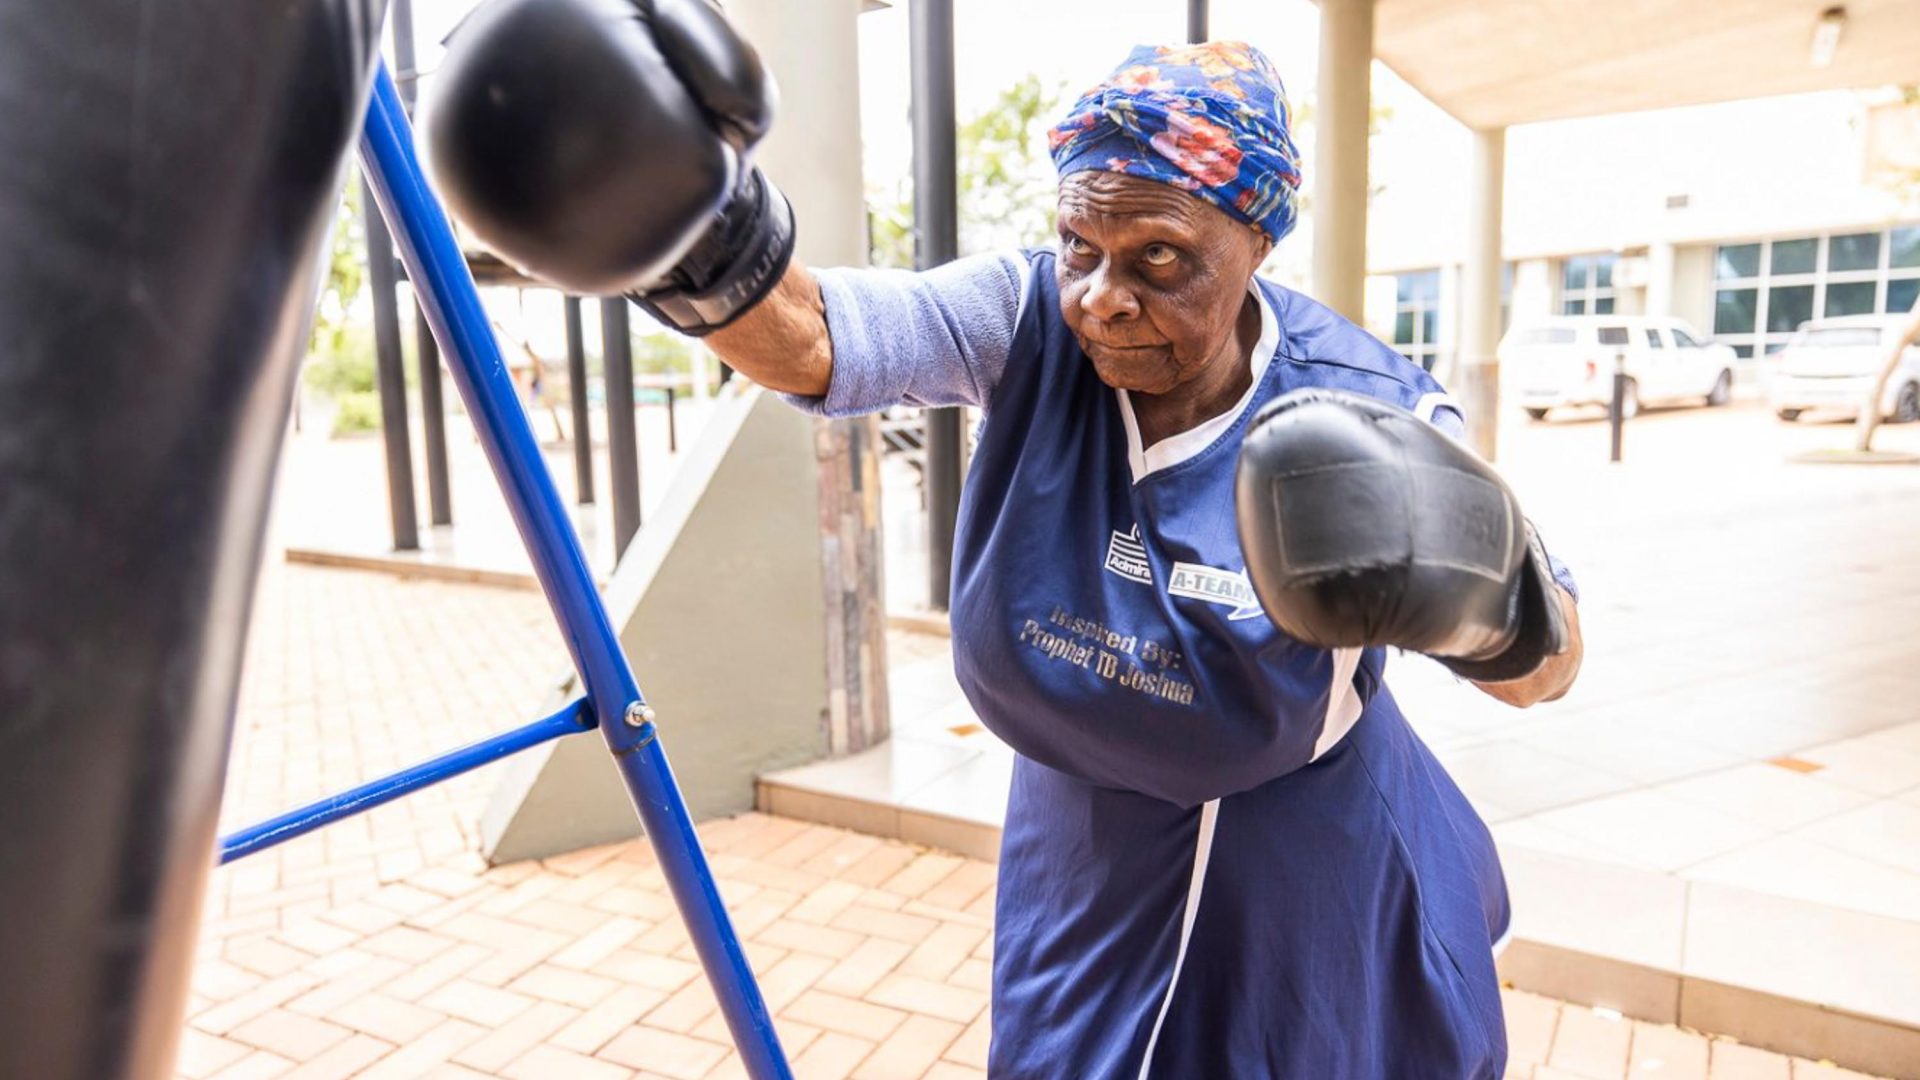 Constance Ngubane boxing in the air. She wears a blue tunic.